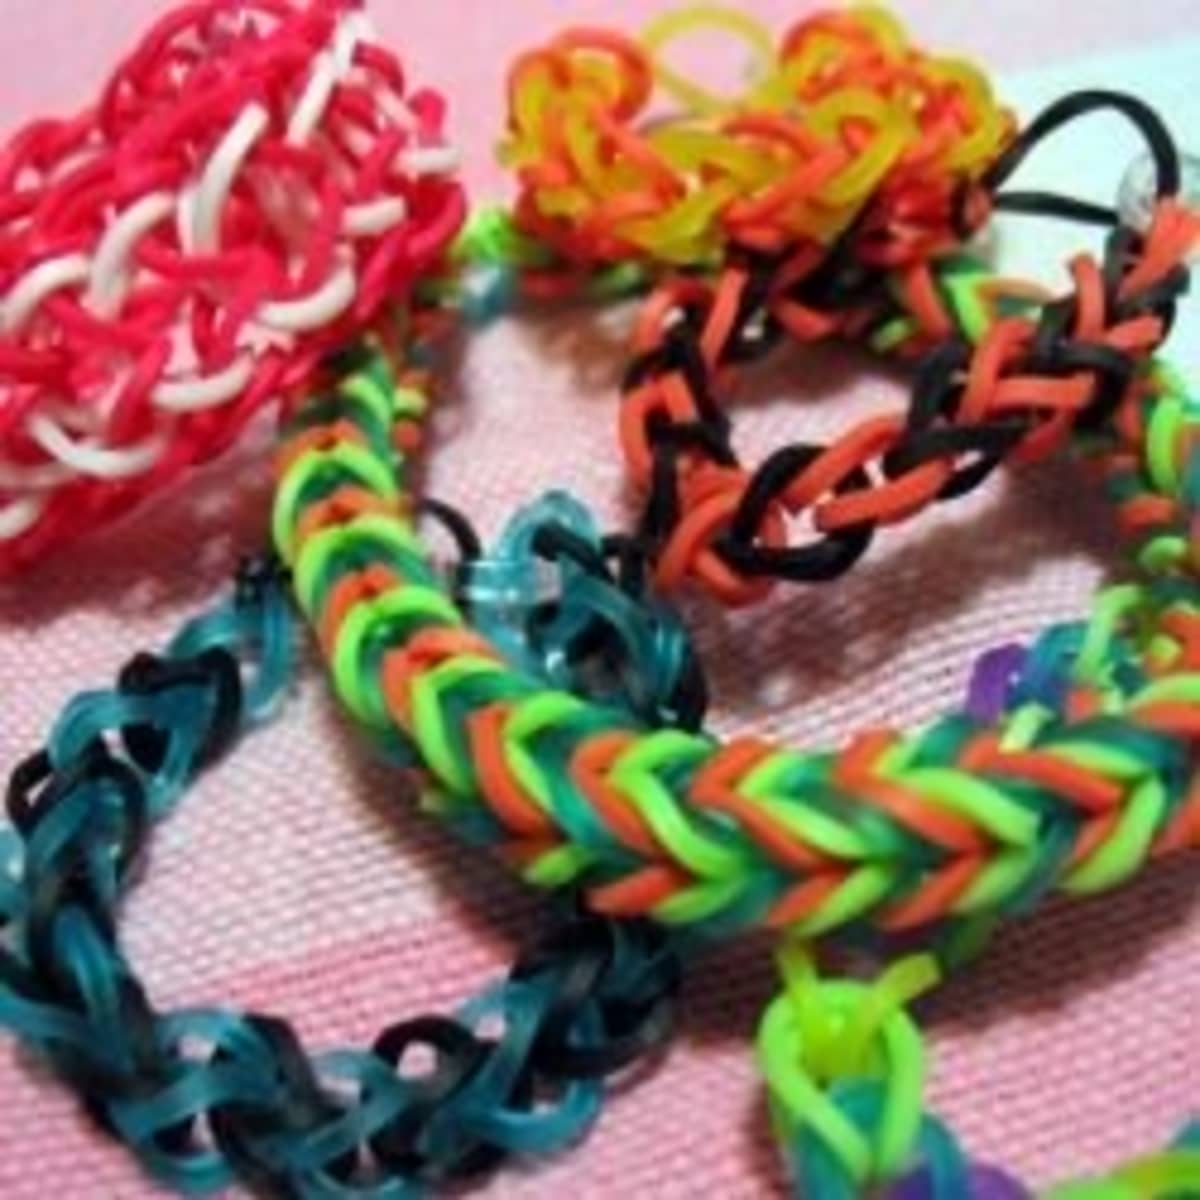 How to Make Loom Bands 5 Easy Rainbow Loom Bracelet Designs without a Loom   Rubber band Bracelets  YouTube